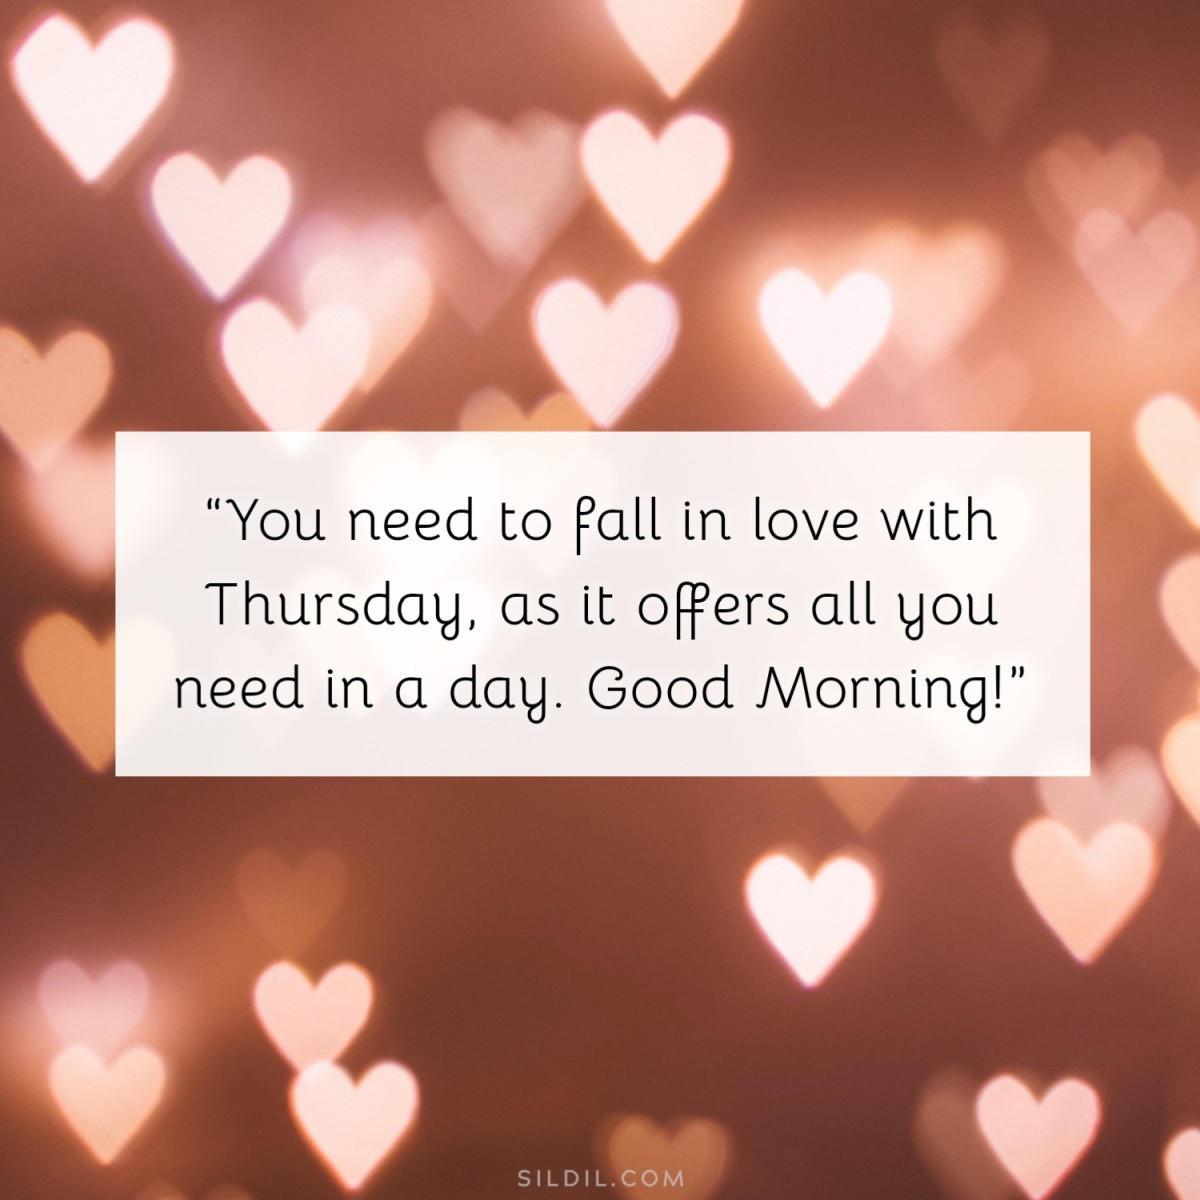 “You need to fall in love with Thursday, as it offers all you need in a day. Good Morning!”